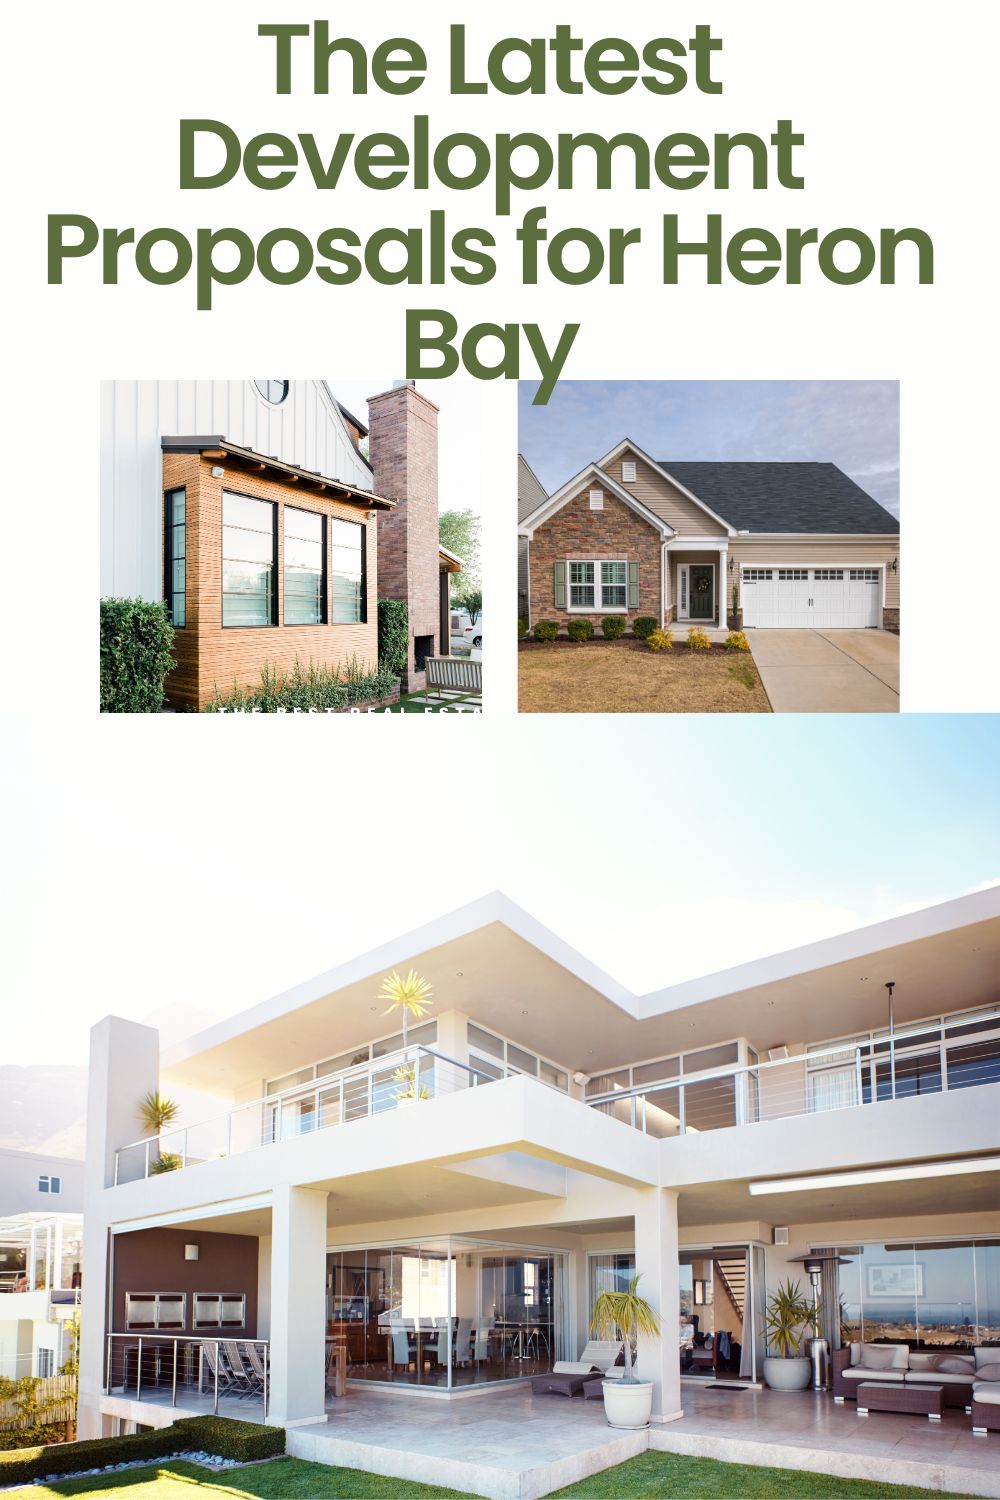 The Latest Development Proposals for Heron Bay